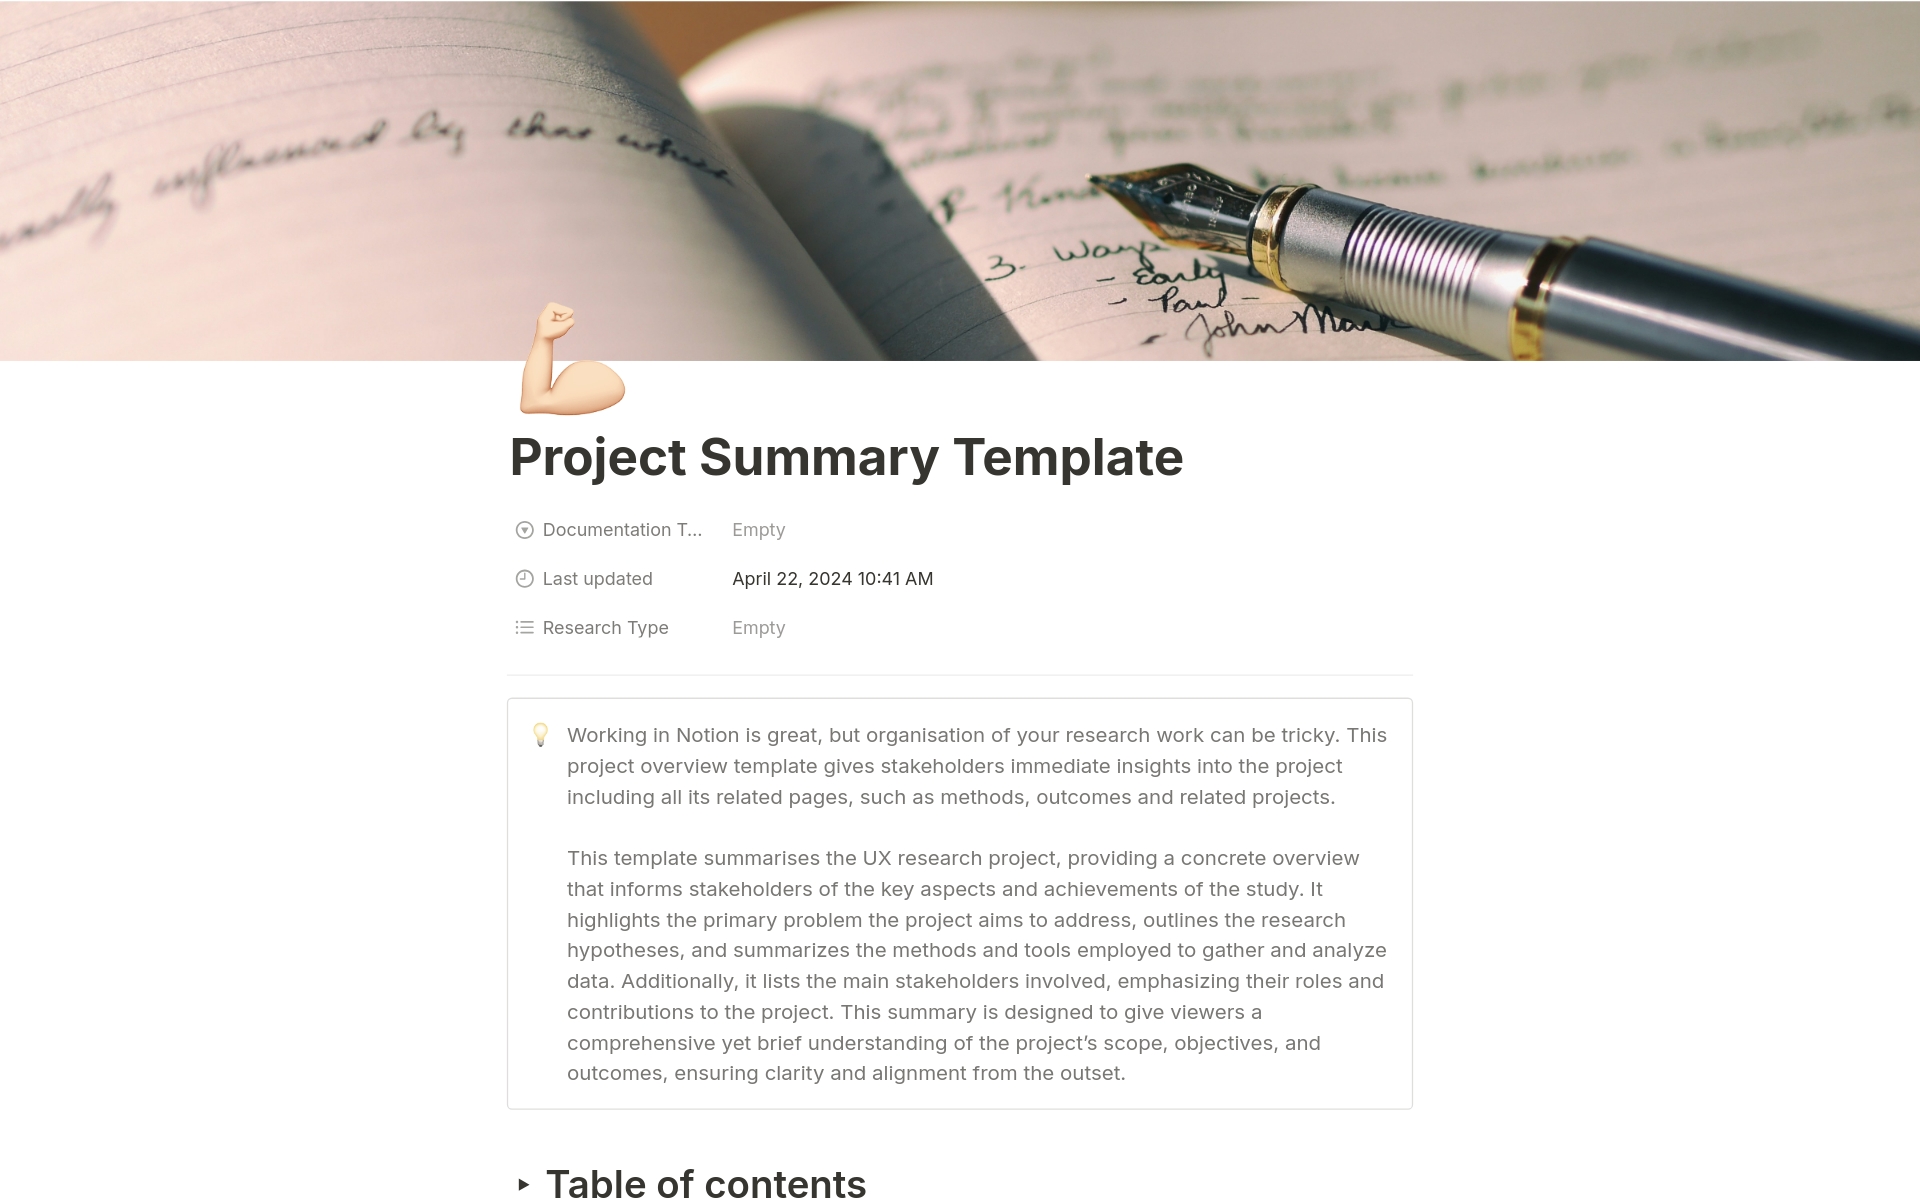 Working in Notion is great, but organisation of your research work can be tricky. This project summary template gives stakeholders immediate insights into the project including all its related pages, such as methods, outcomes and related projects.